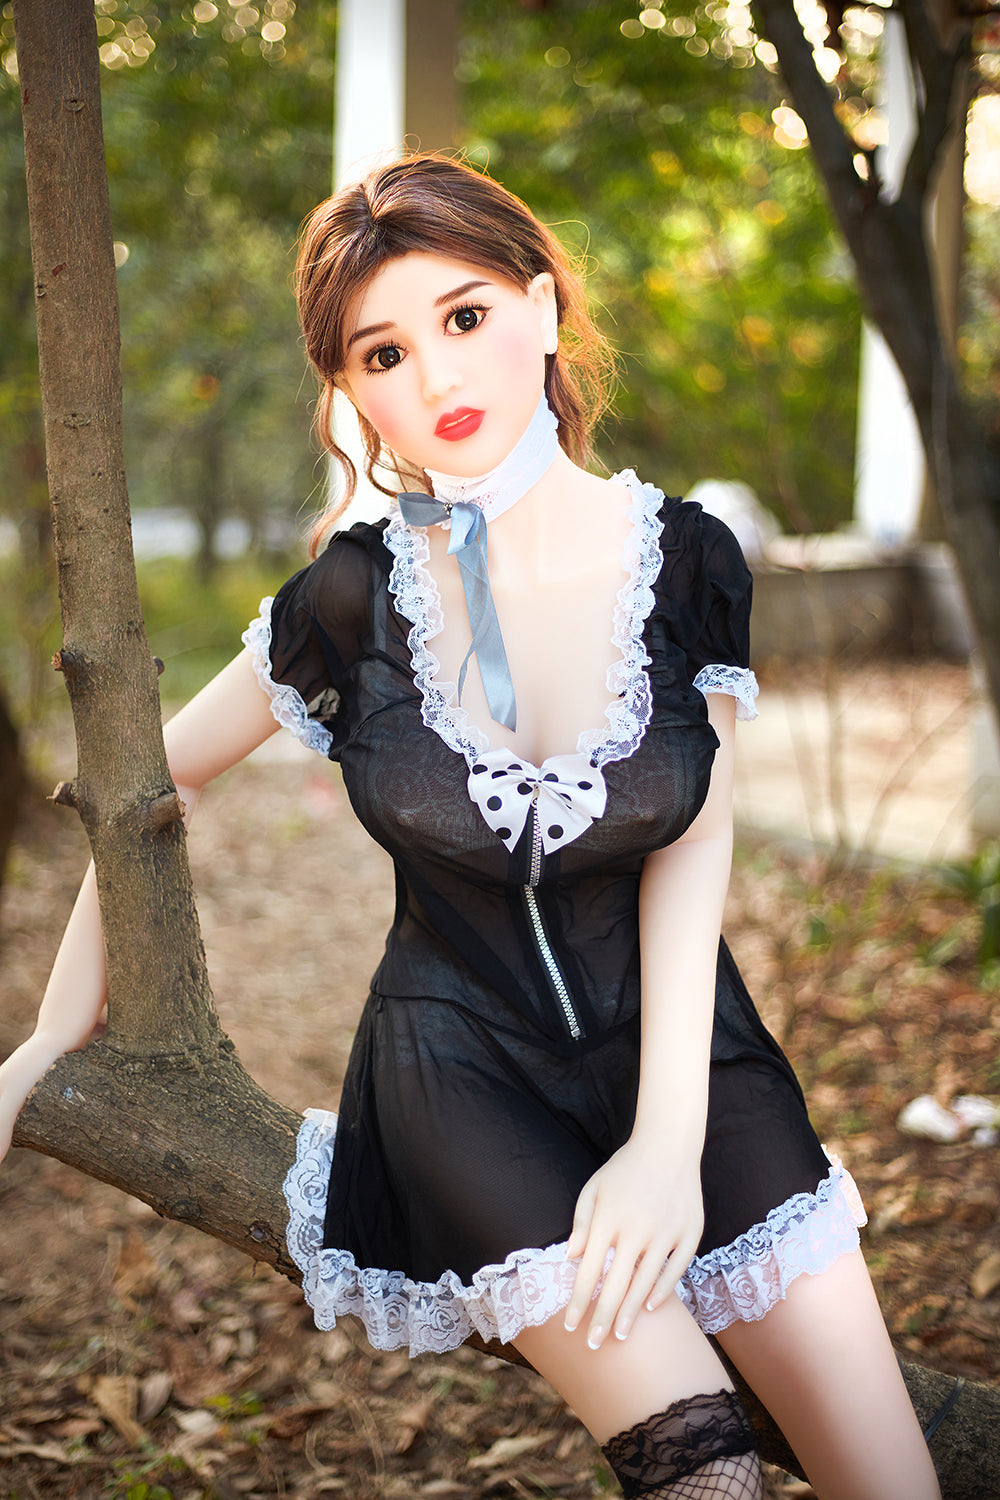 Kingmansion Kimberly 153cm E Cup Realistic Porn Living Love Sex Toy Doll for Men